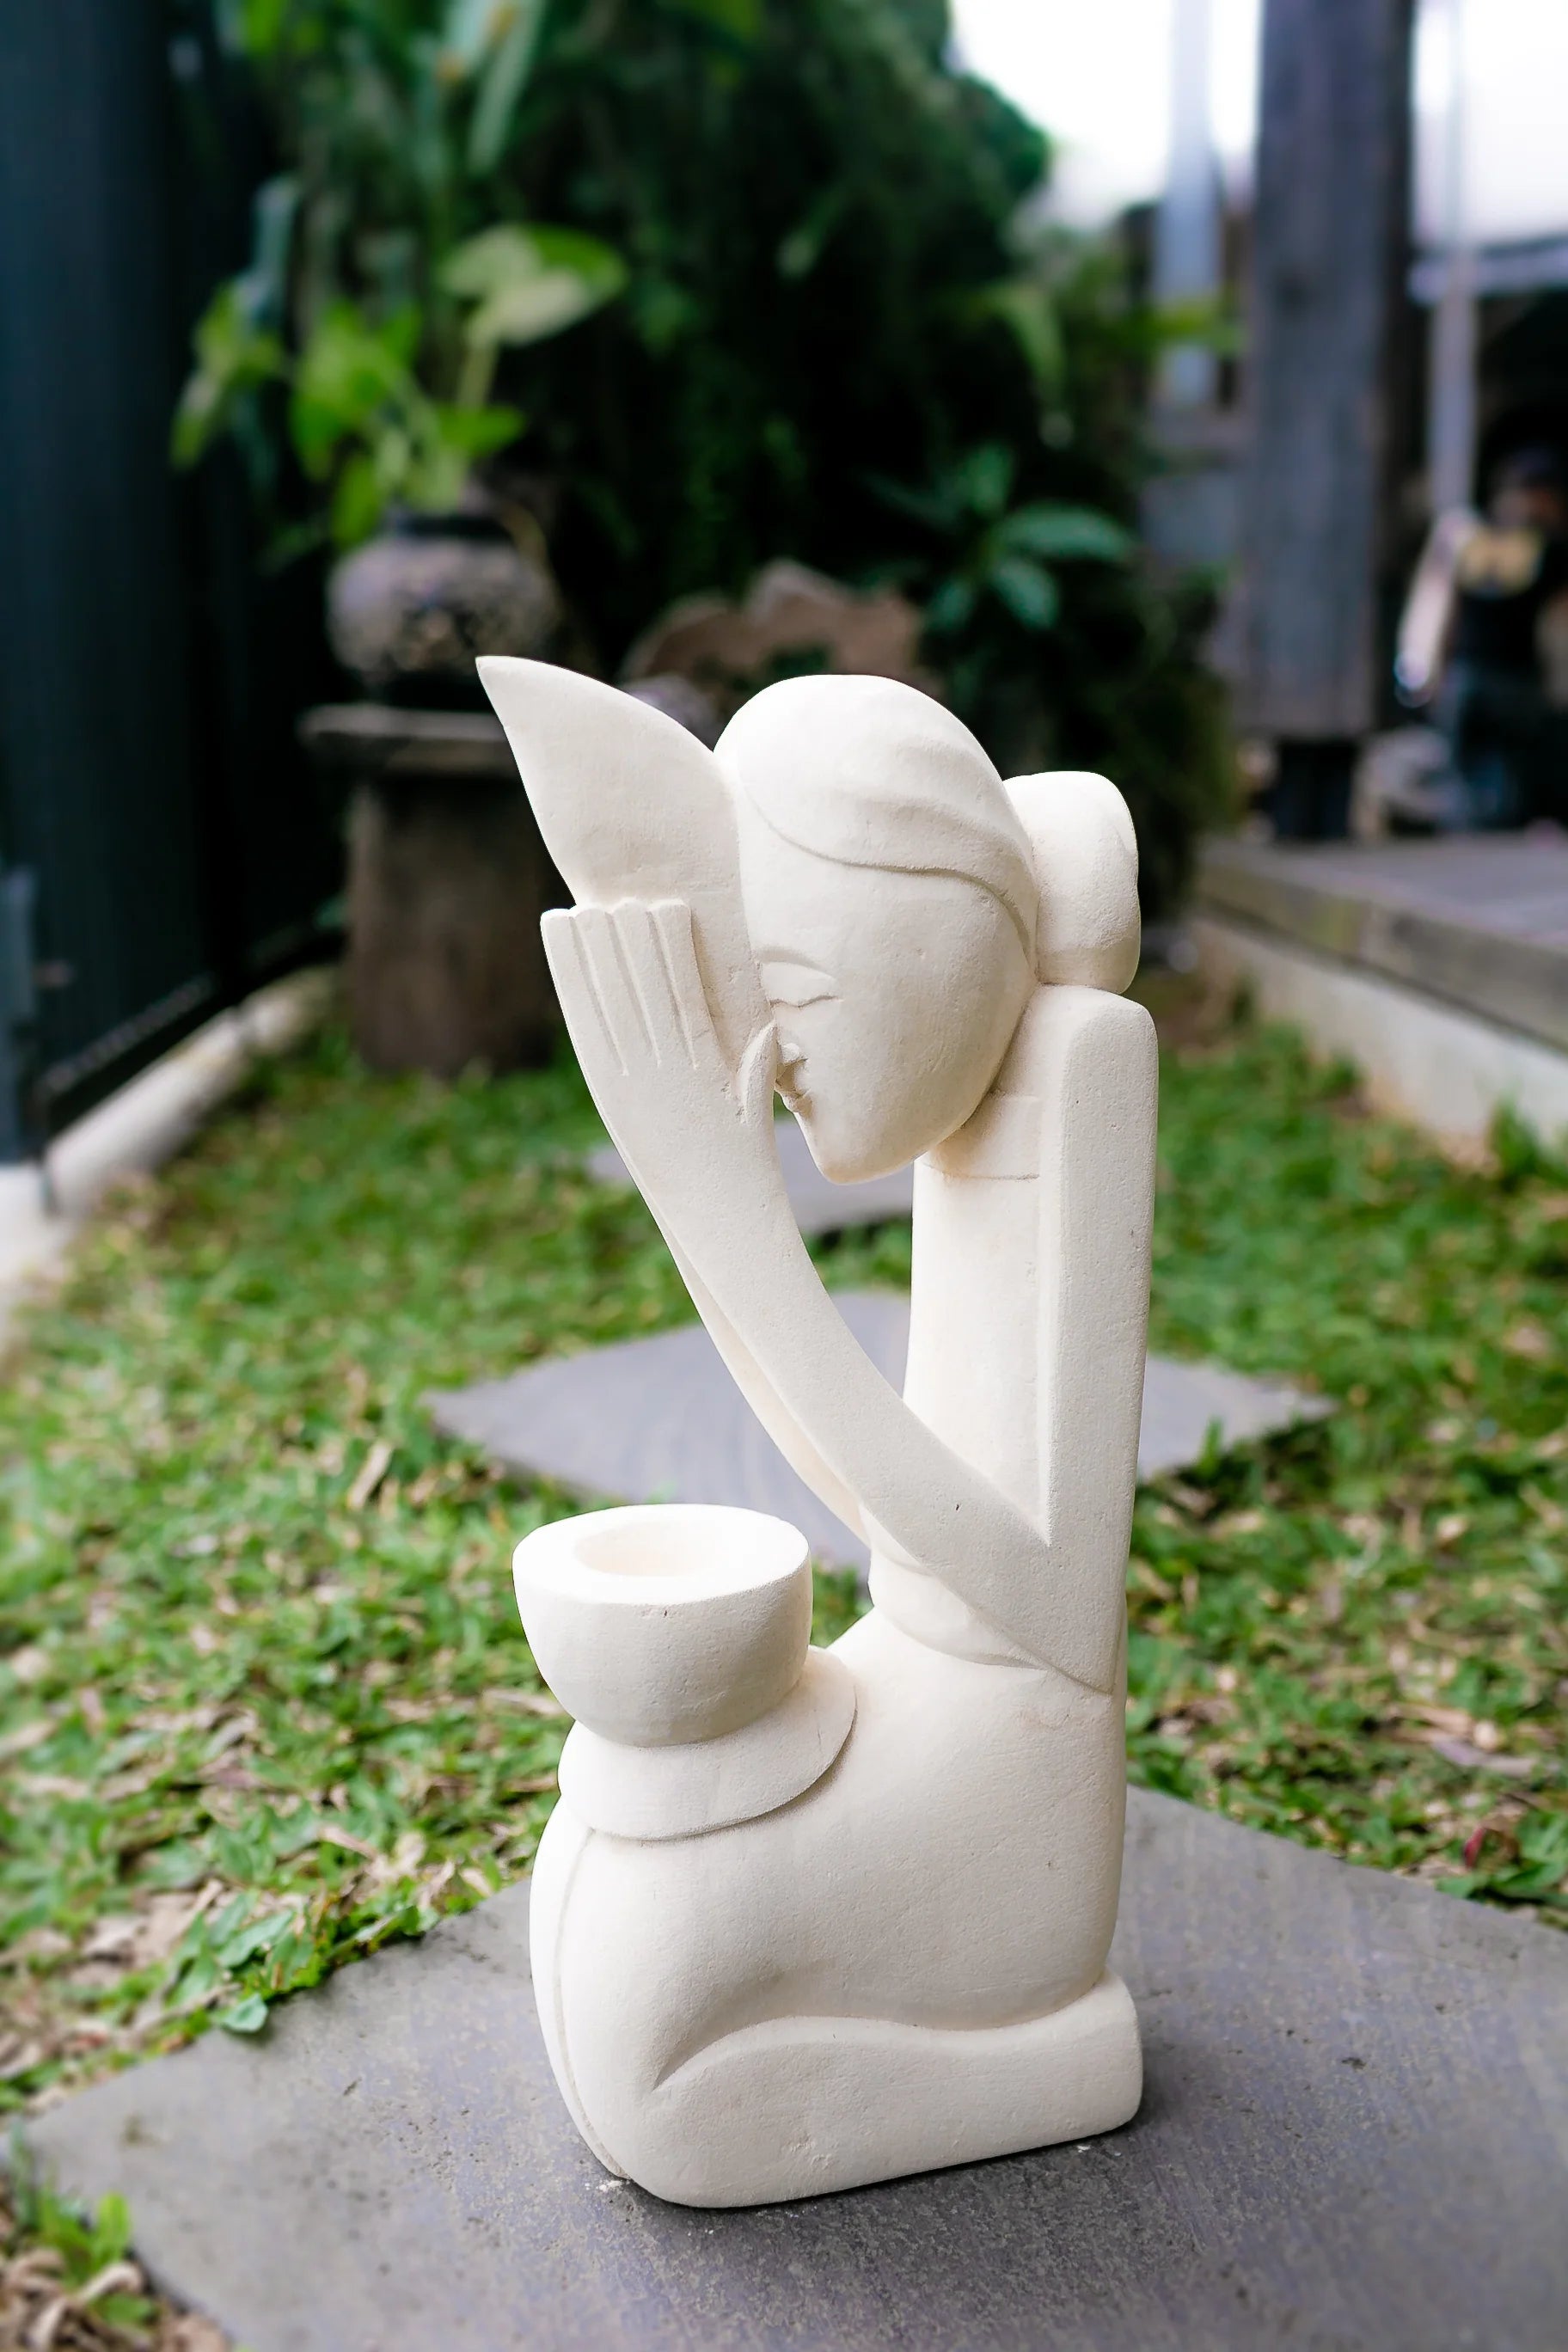 Selamat Datang Welcoming Lady, Outdoor Decor: Front view displaying the statue's serene grace in limestone white, ideal for enhancing the positivity of entryways or gardens. Click for detail.